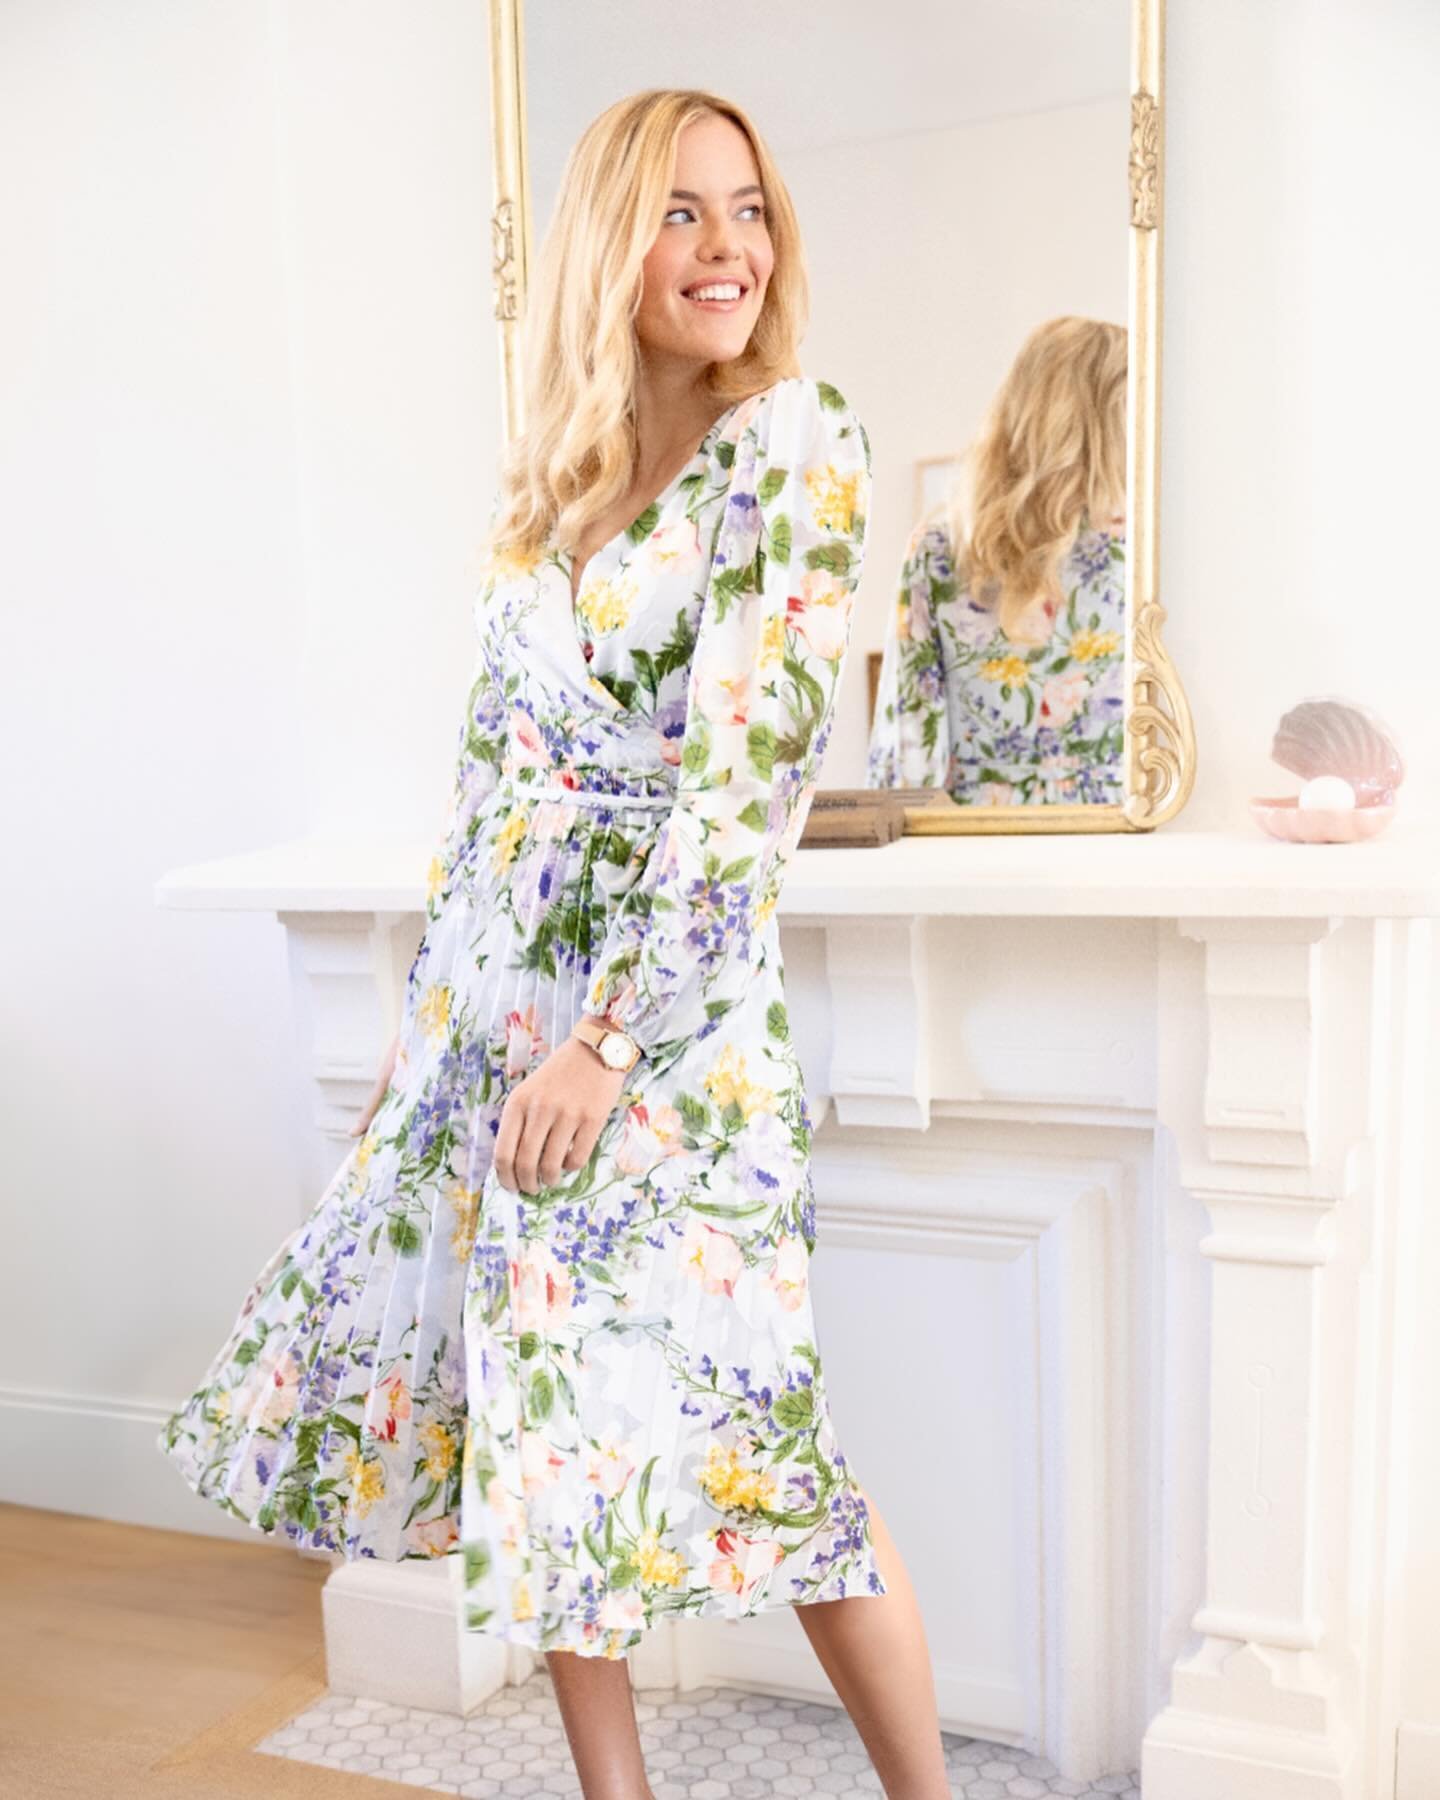 Mother&rsquo;s Day Giveaway✨ Say &lsquo;I love you&rsquo; with flowers that last!🌸 Enter for a chance to win one of these Kensie floral dresses of your choosing. The Giveaway ends Monday, May 6th. Three lucky winners will be selected to receive thei